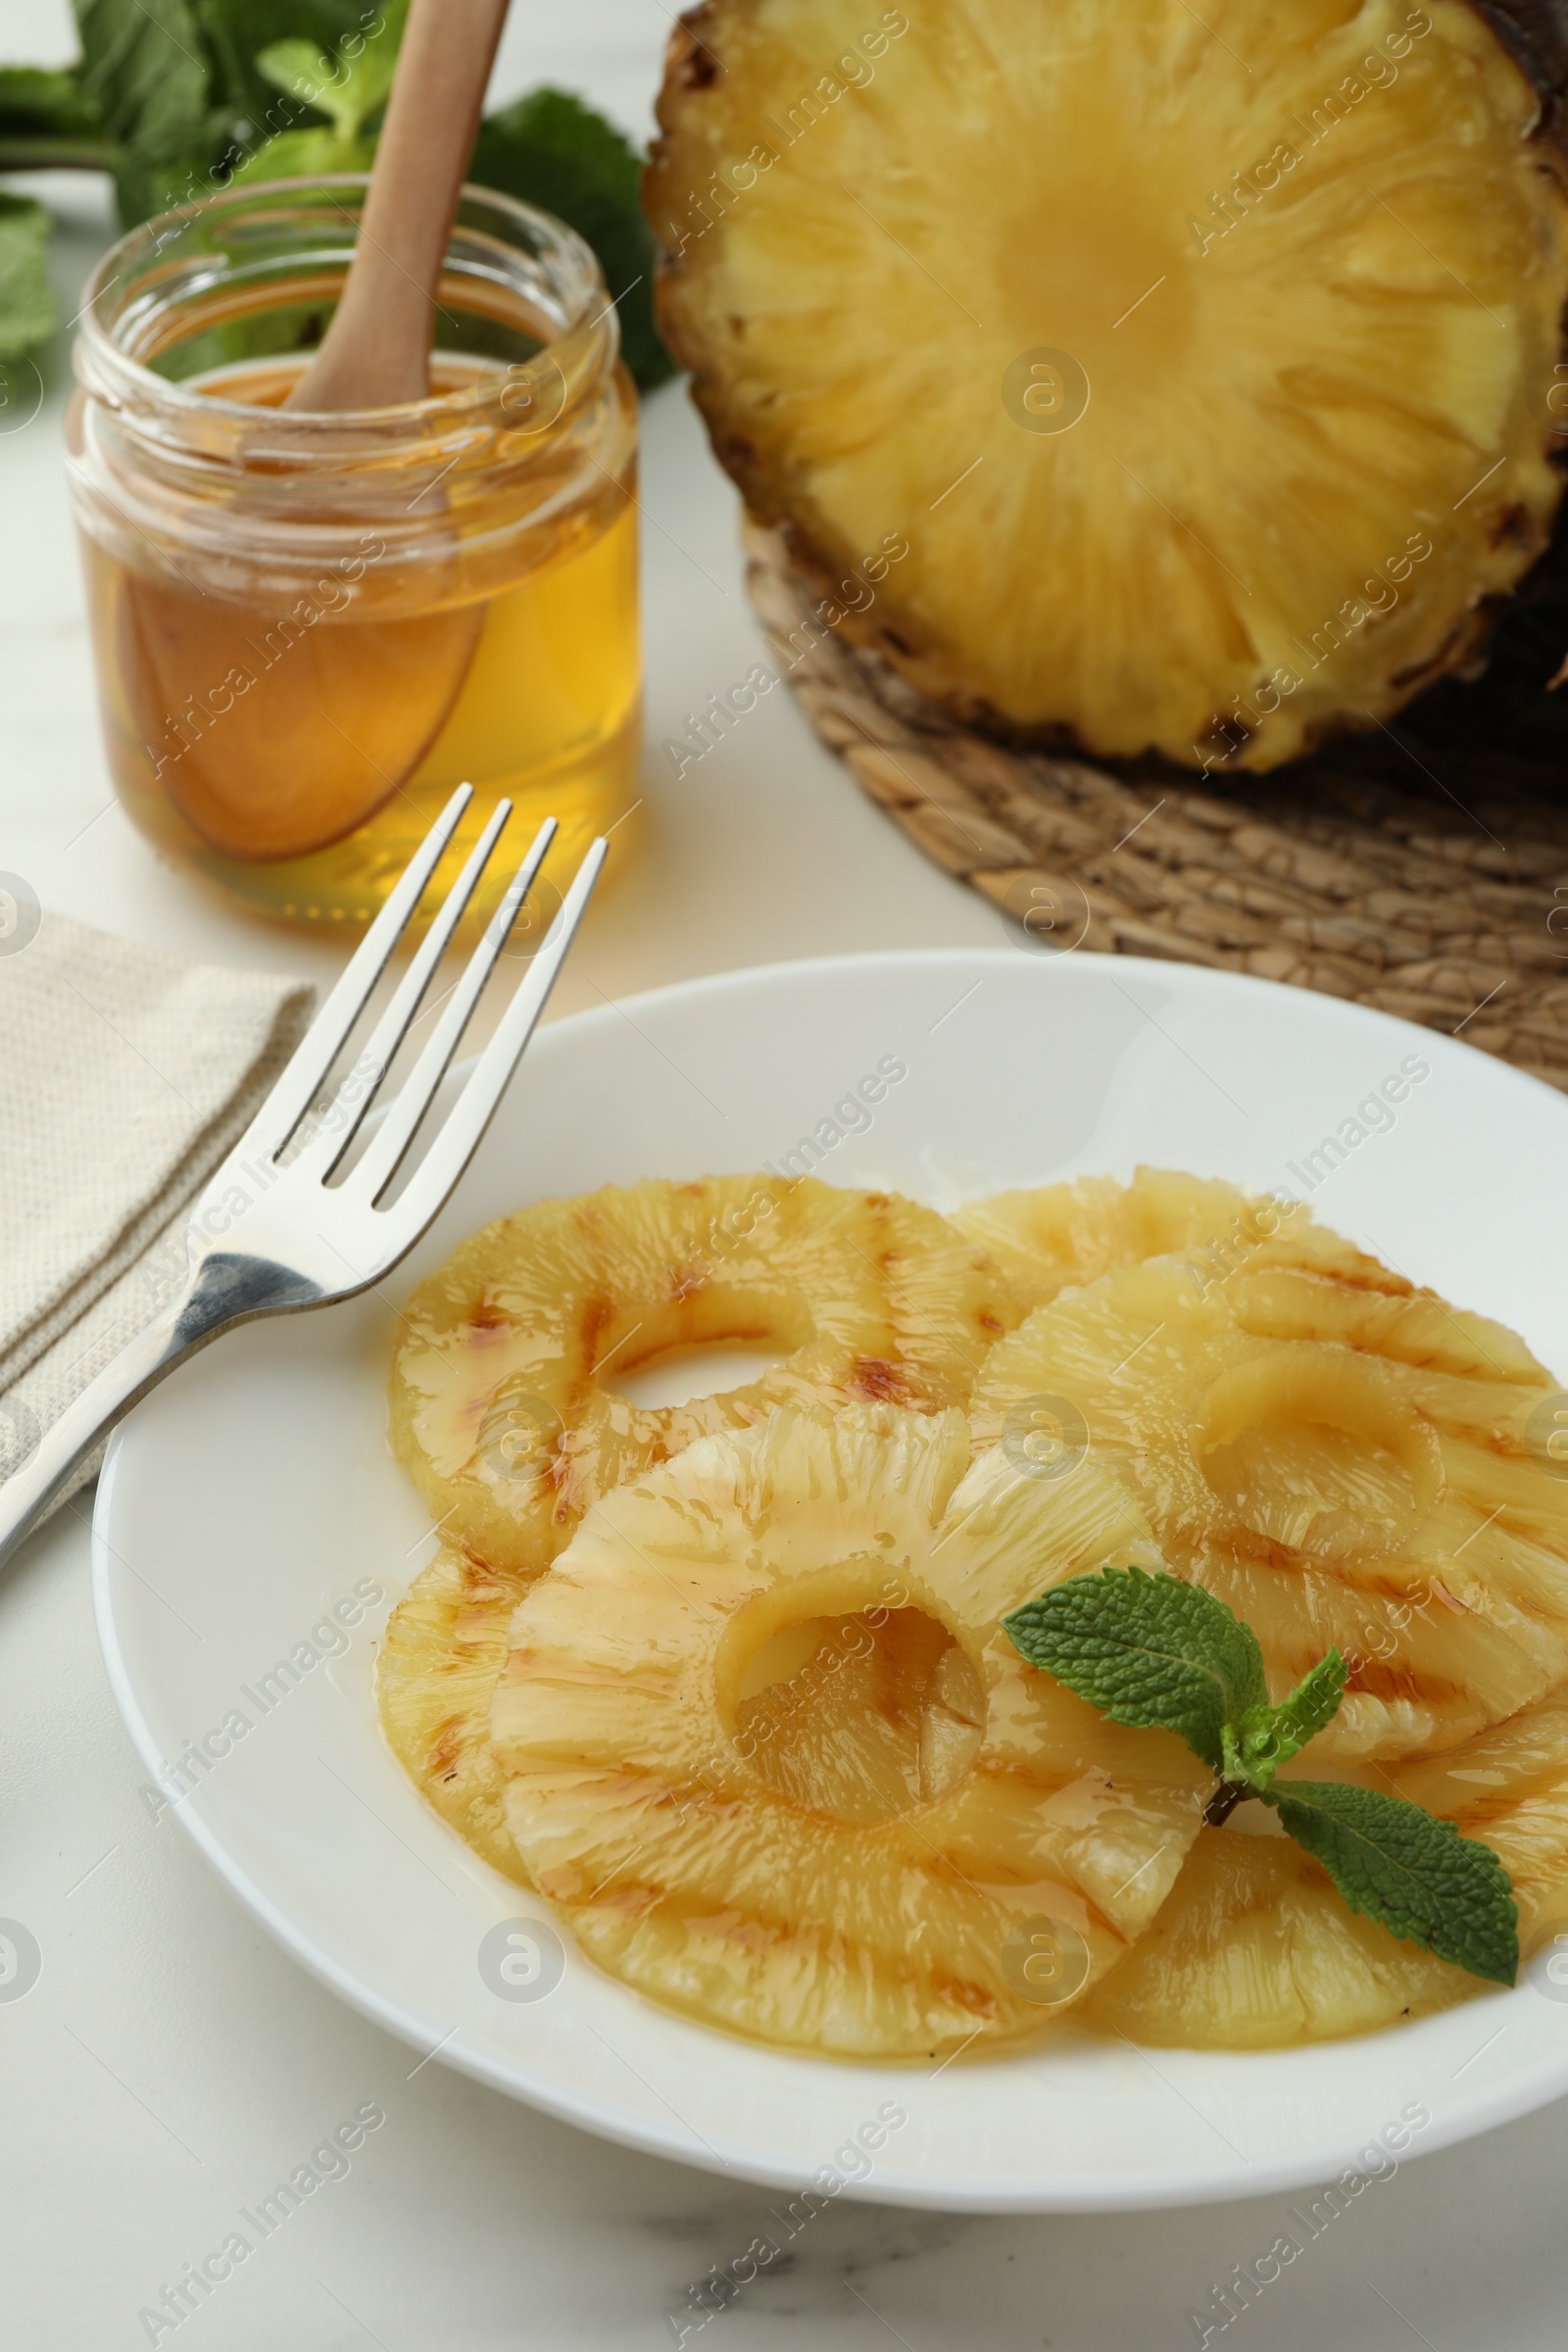 Photo of Tasty grilled pineapple slices served on white table